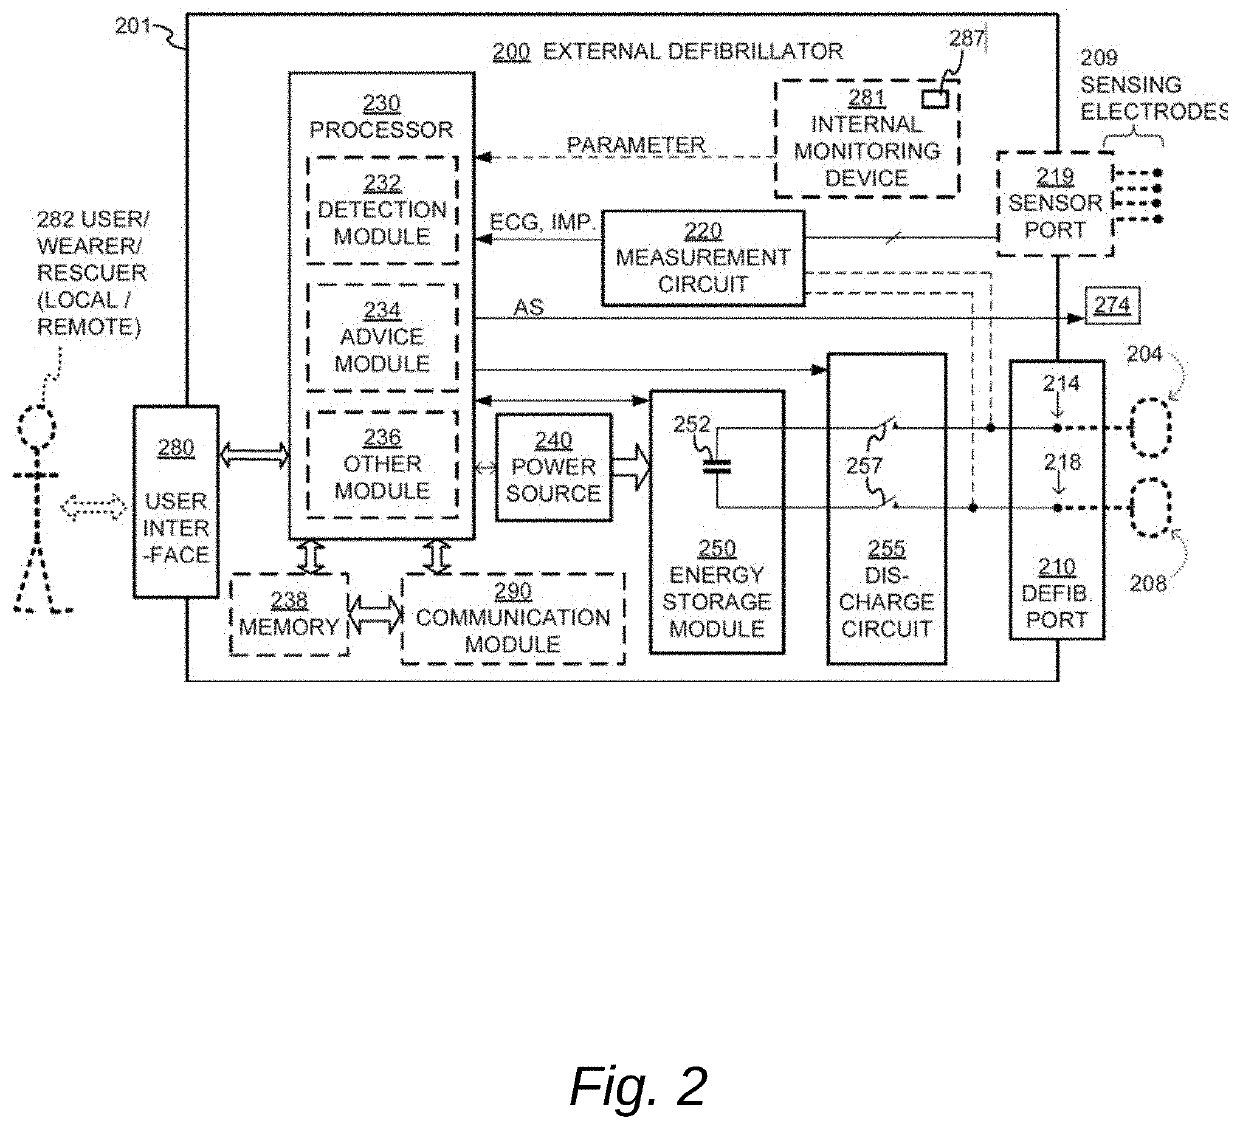 Data channel selection and timeline navigation in a cardiac monitoring system